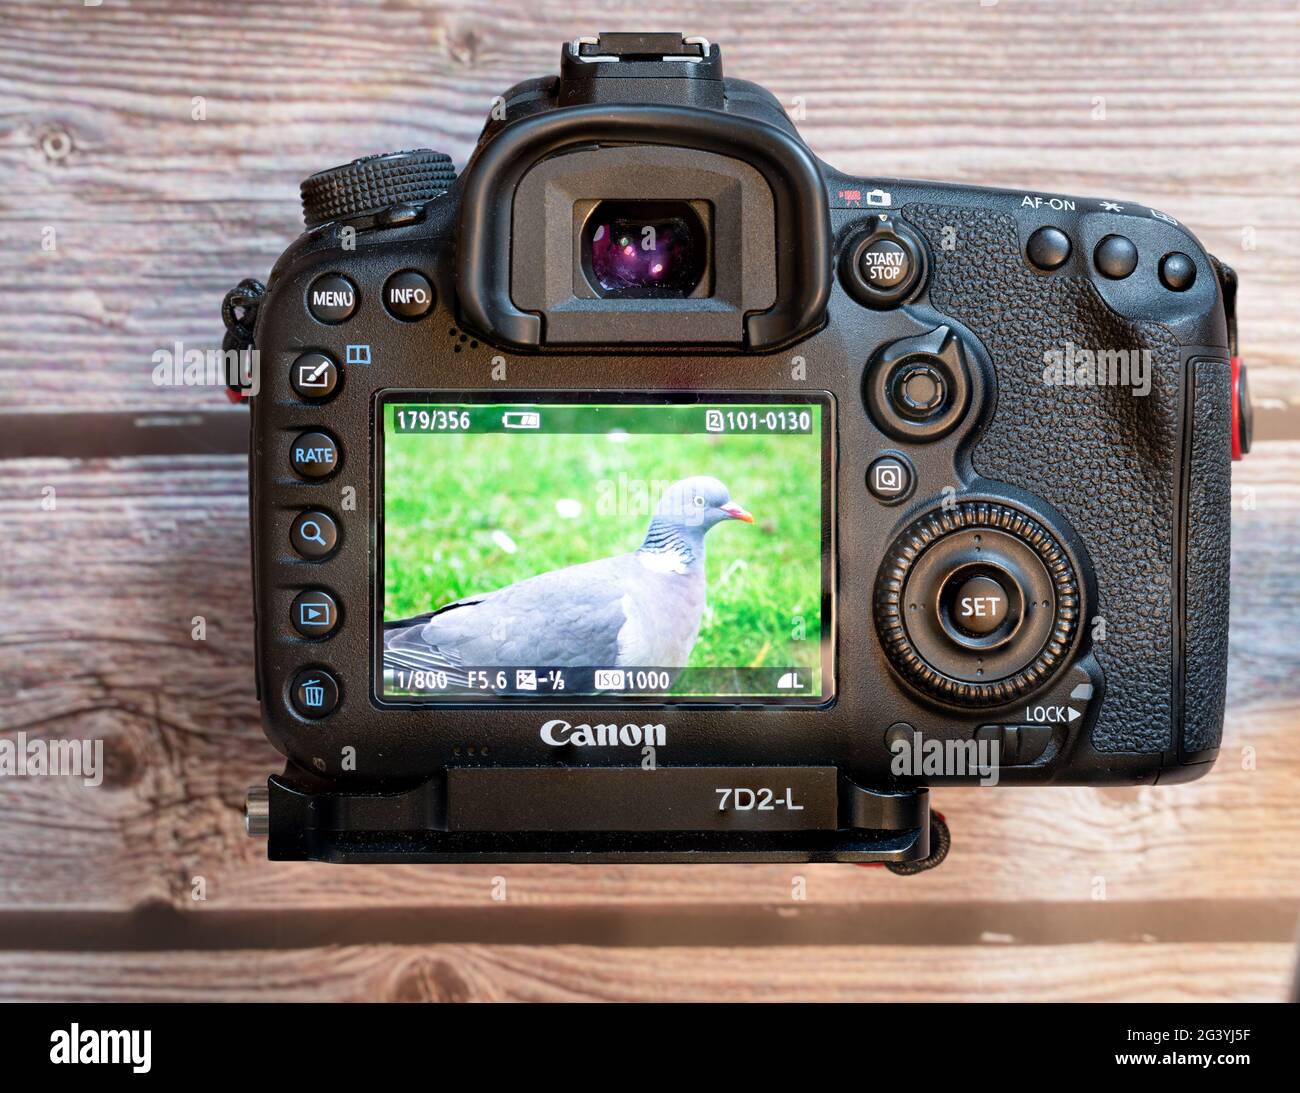 rear view of a canon dslr with image on the lcd screen Stock Photo - Alamy